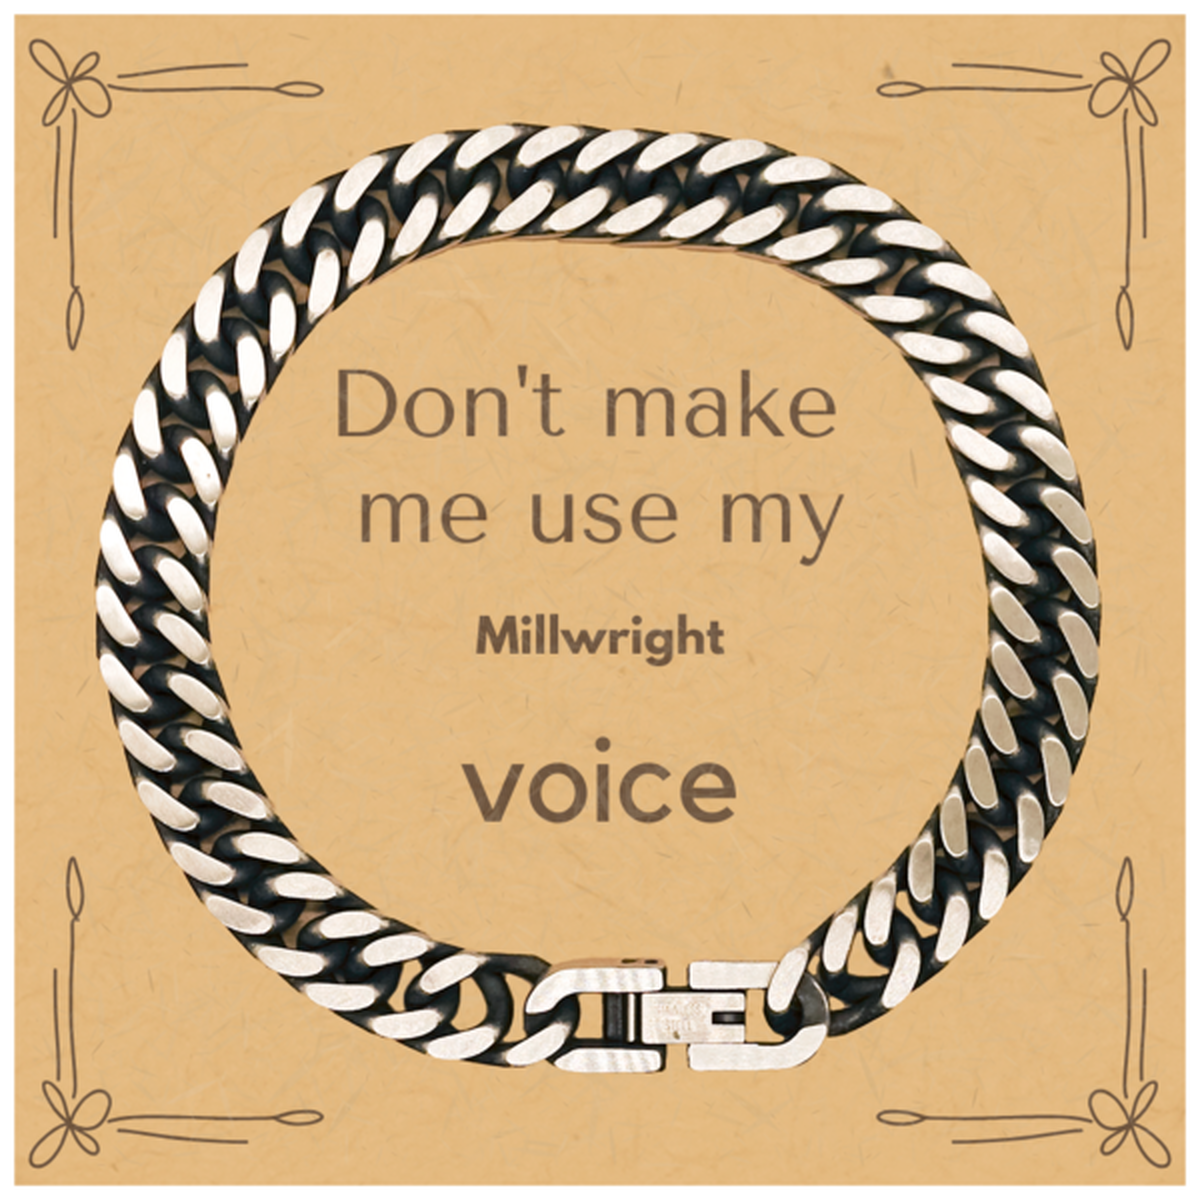 Don't make me use my Millwright voice, Sarcasm Millwright Card Gifts, Christmas Millwright Cuban Link Chain Bracelet Birthday Unique Gifts For Millwright Coworkers, Men, Women, Colleague, Friends